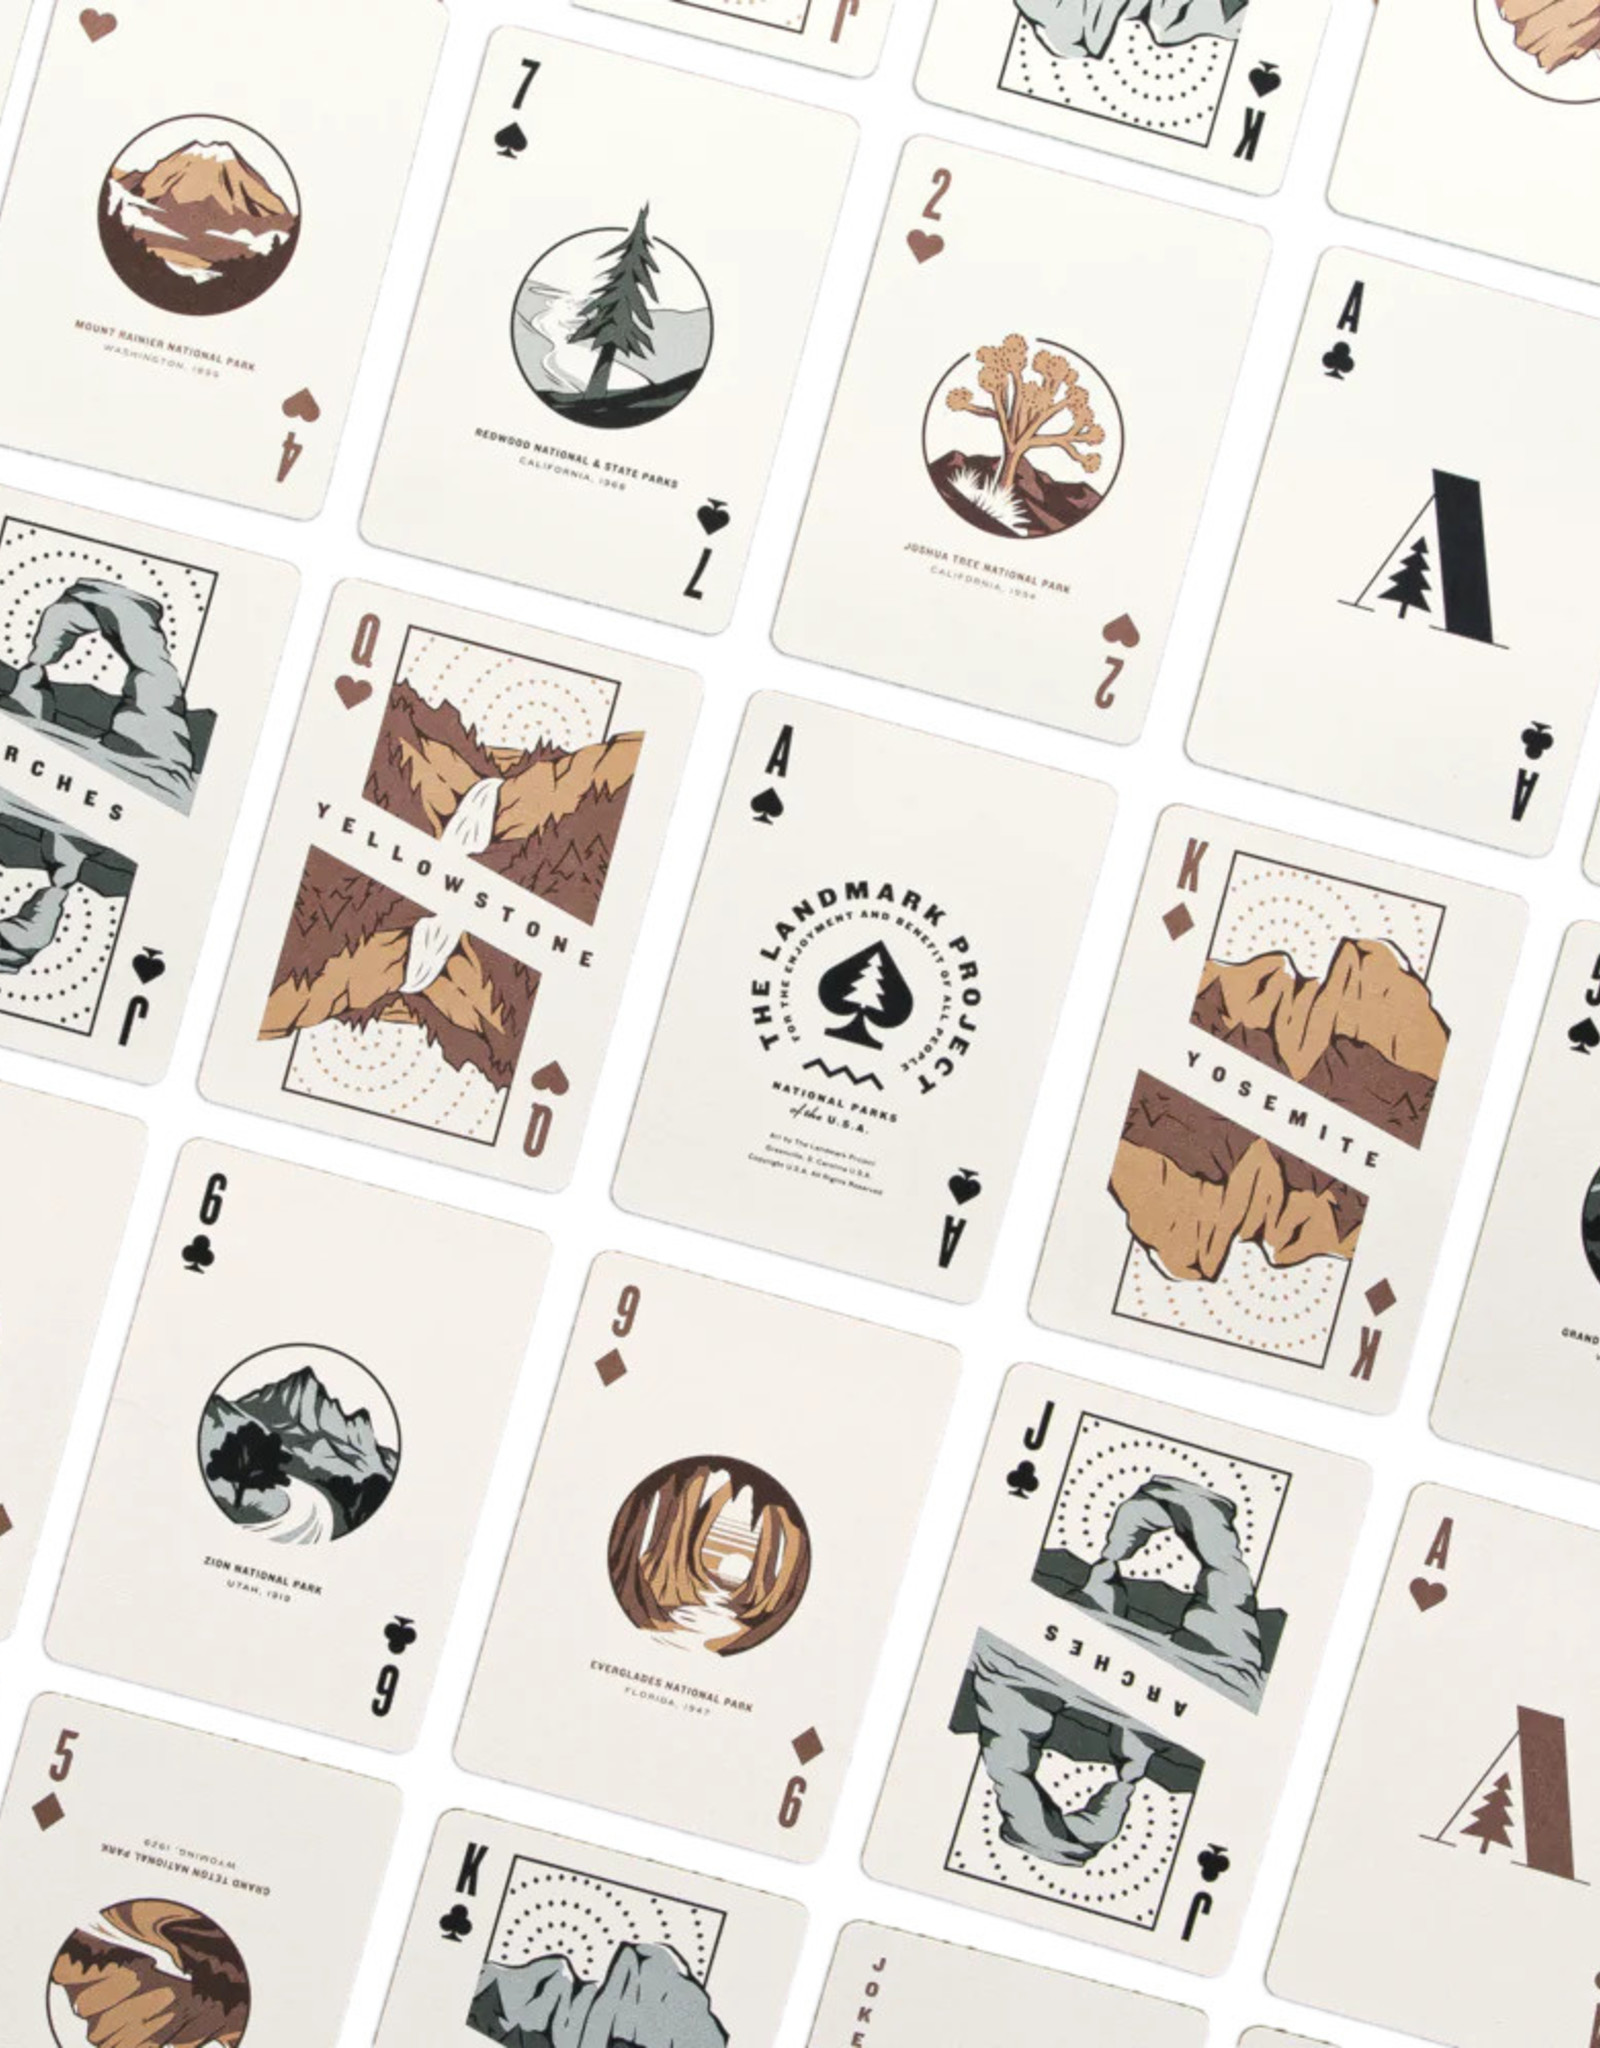 National Parks Playing Cards - The Landmark Project